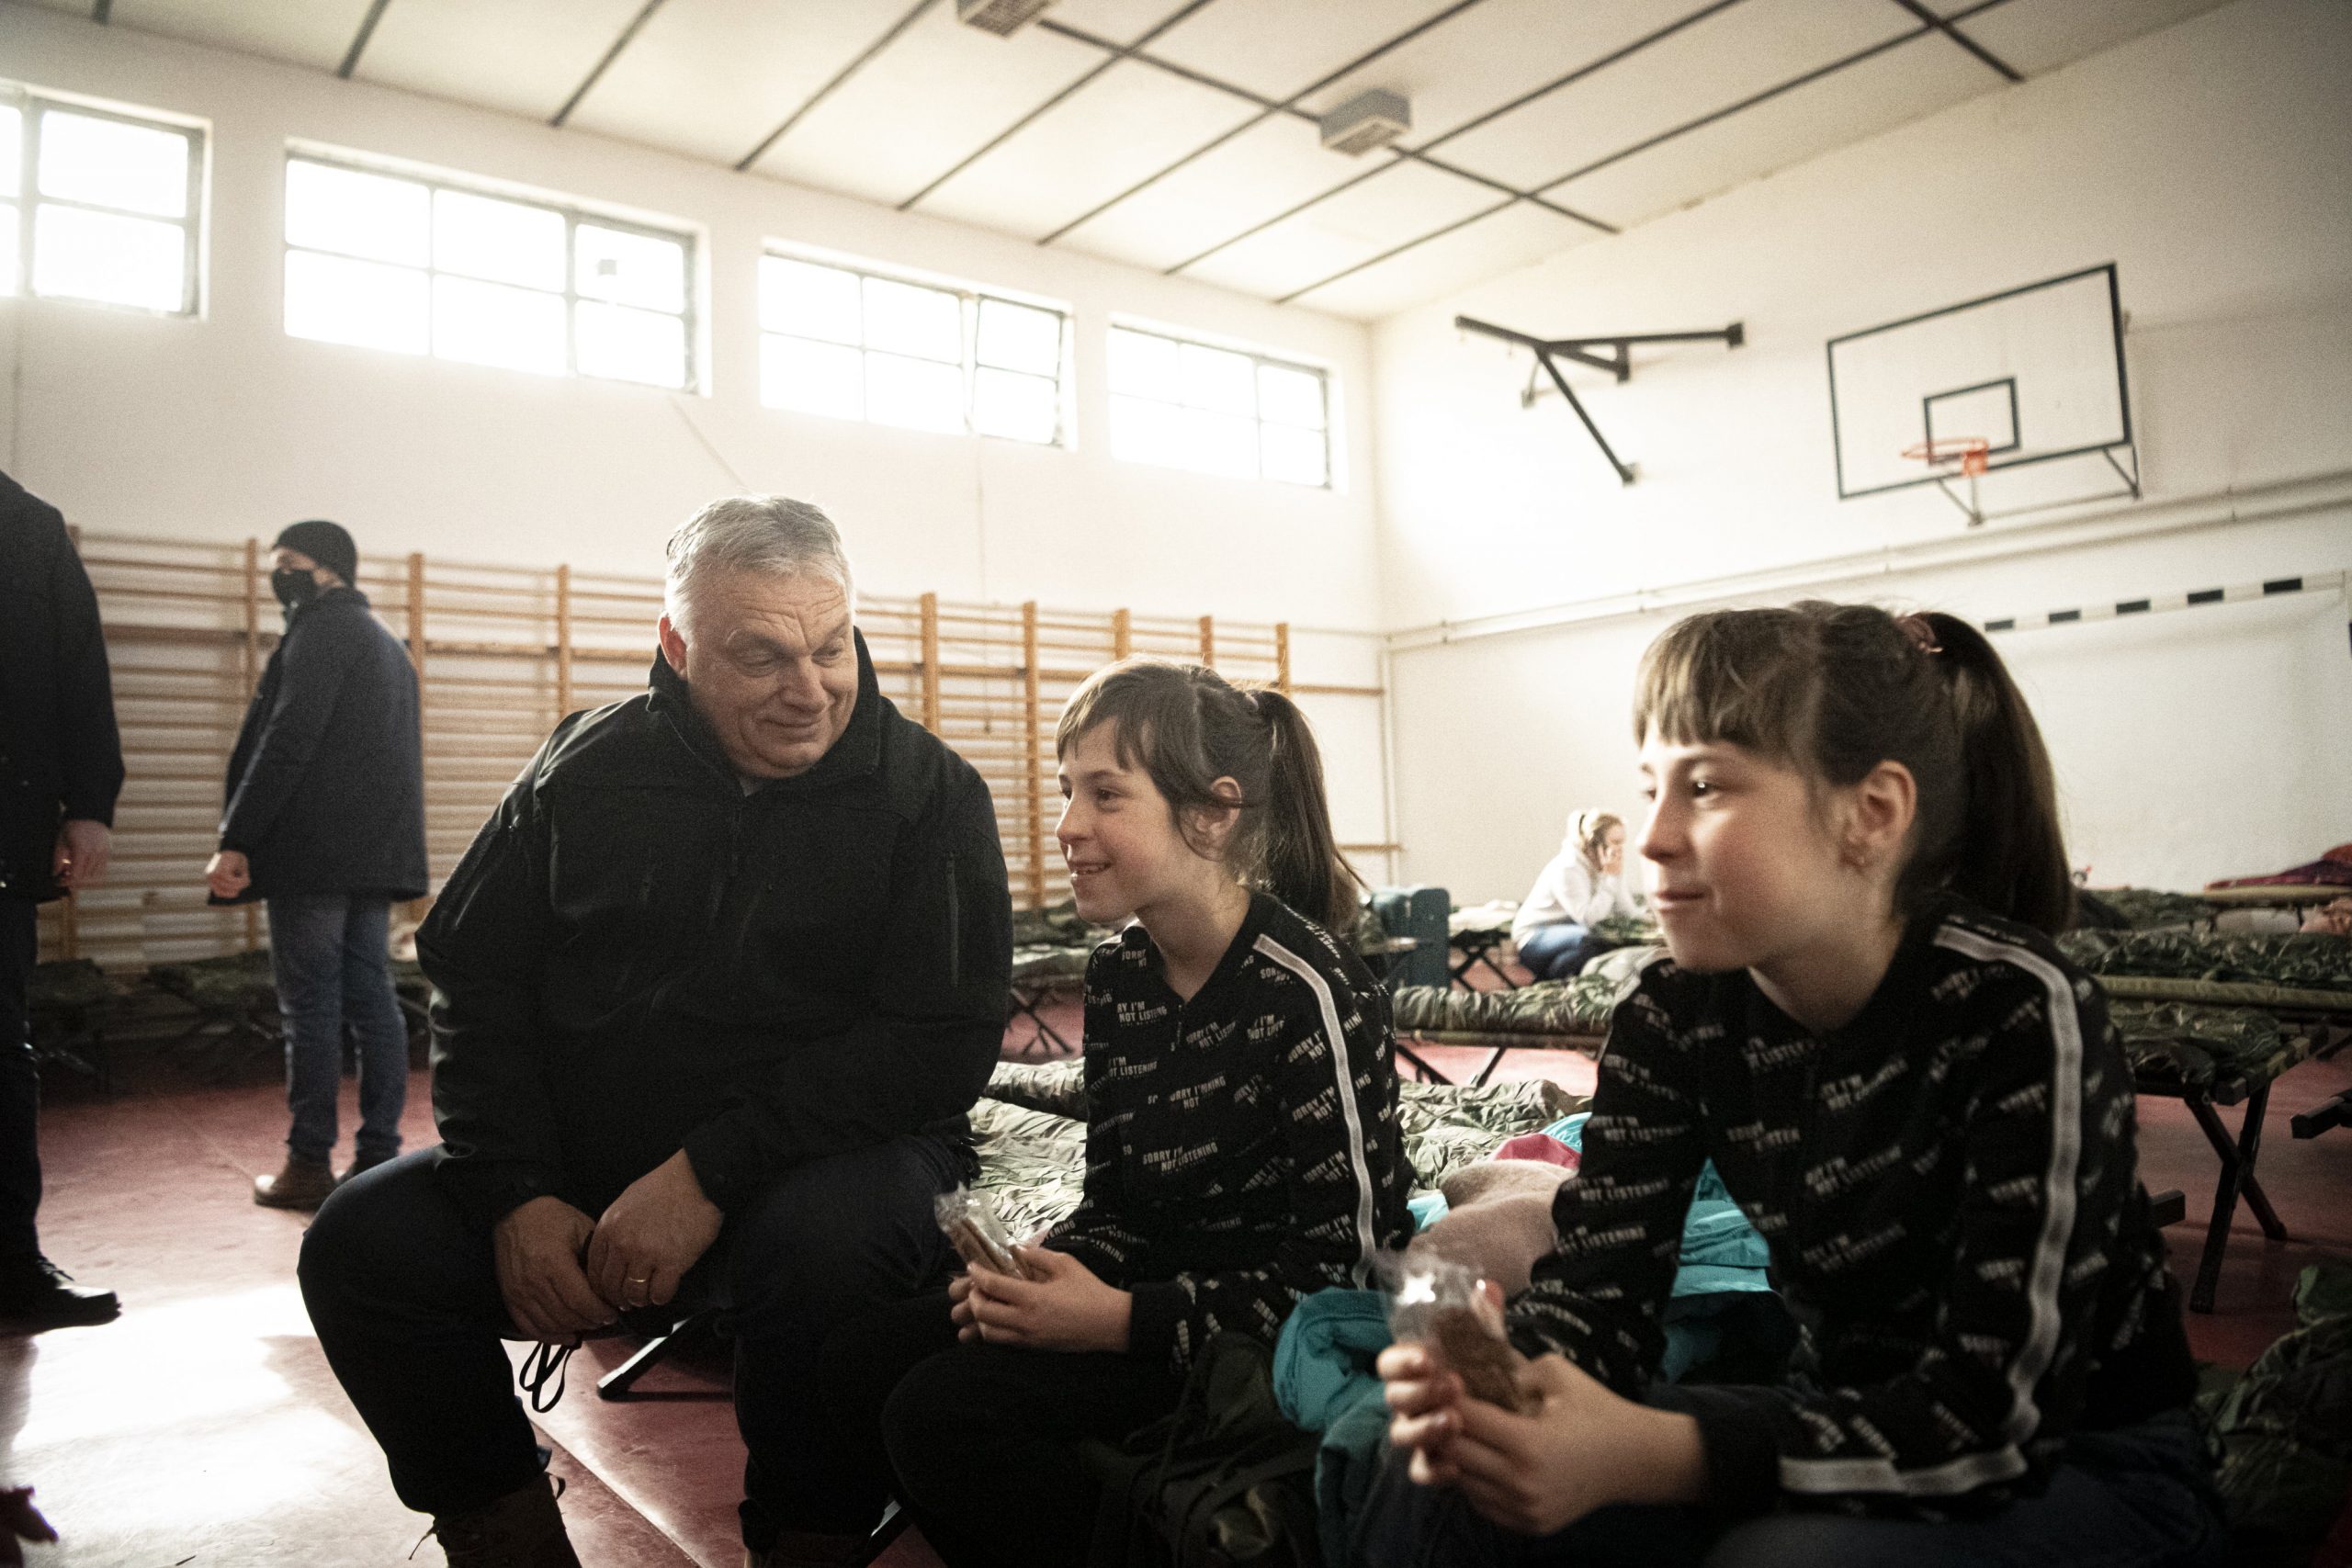 PM Orbán: All Refugees from Ukraine Taken Care of in Hungary